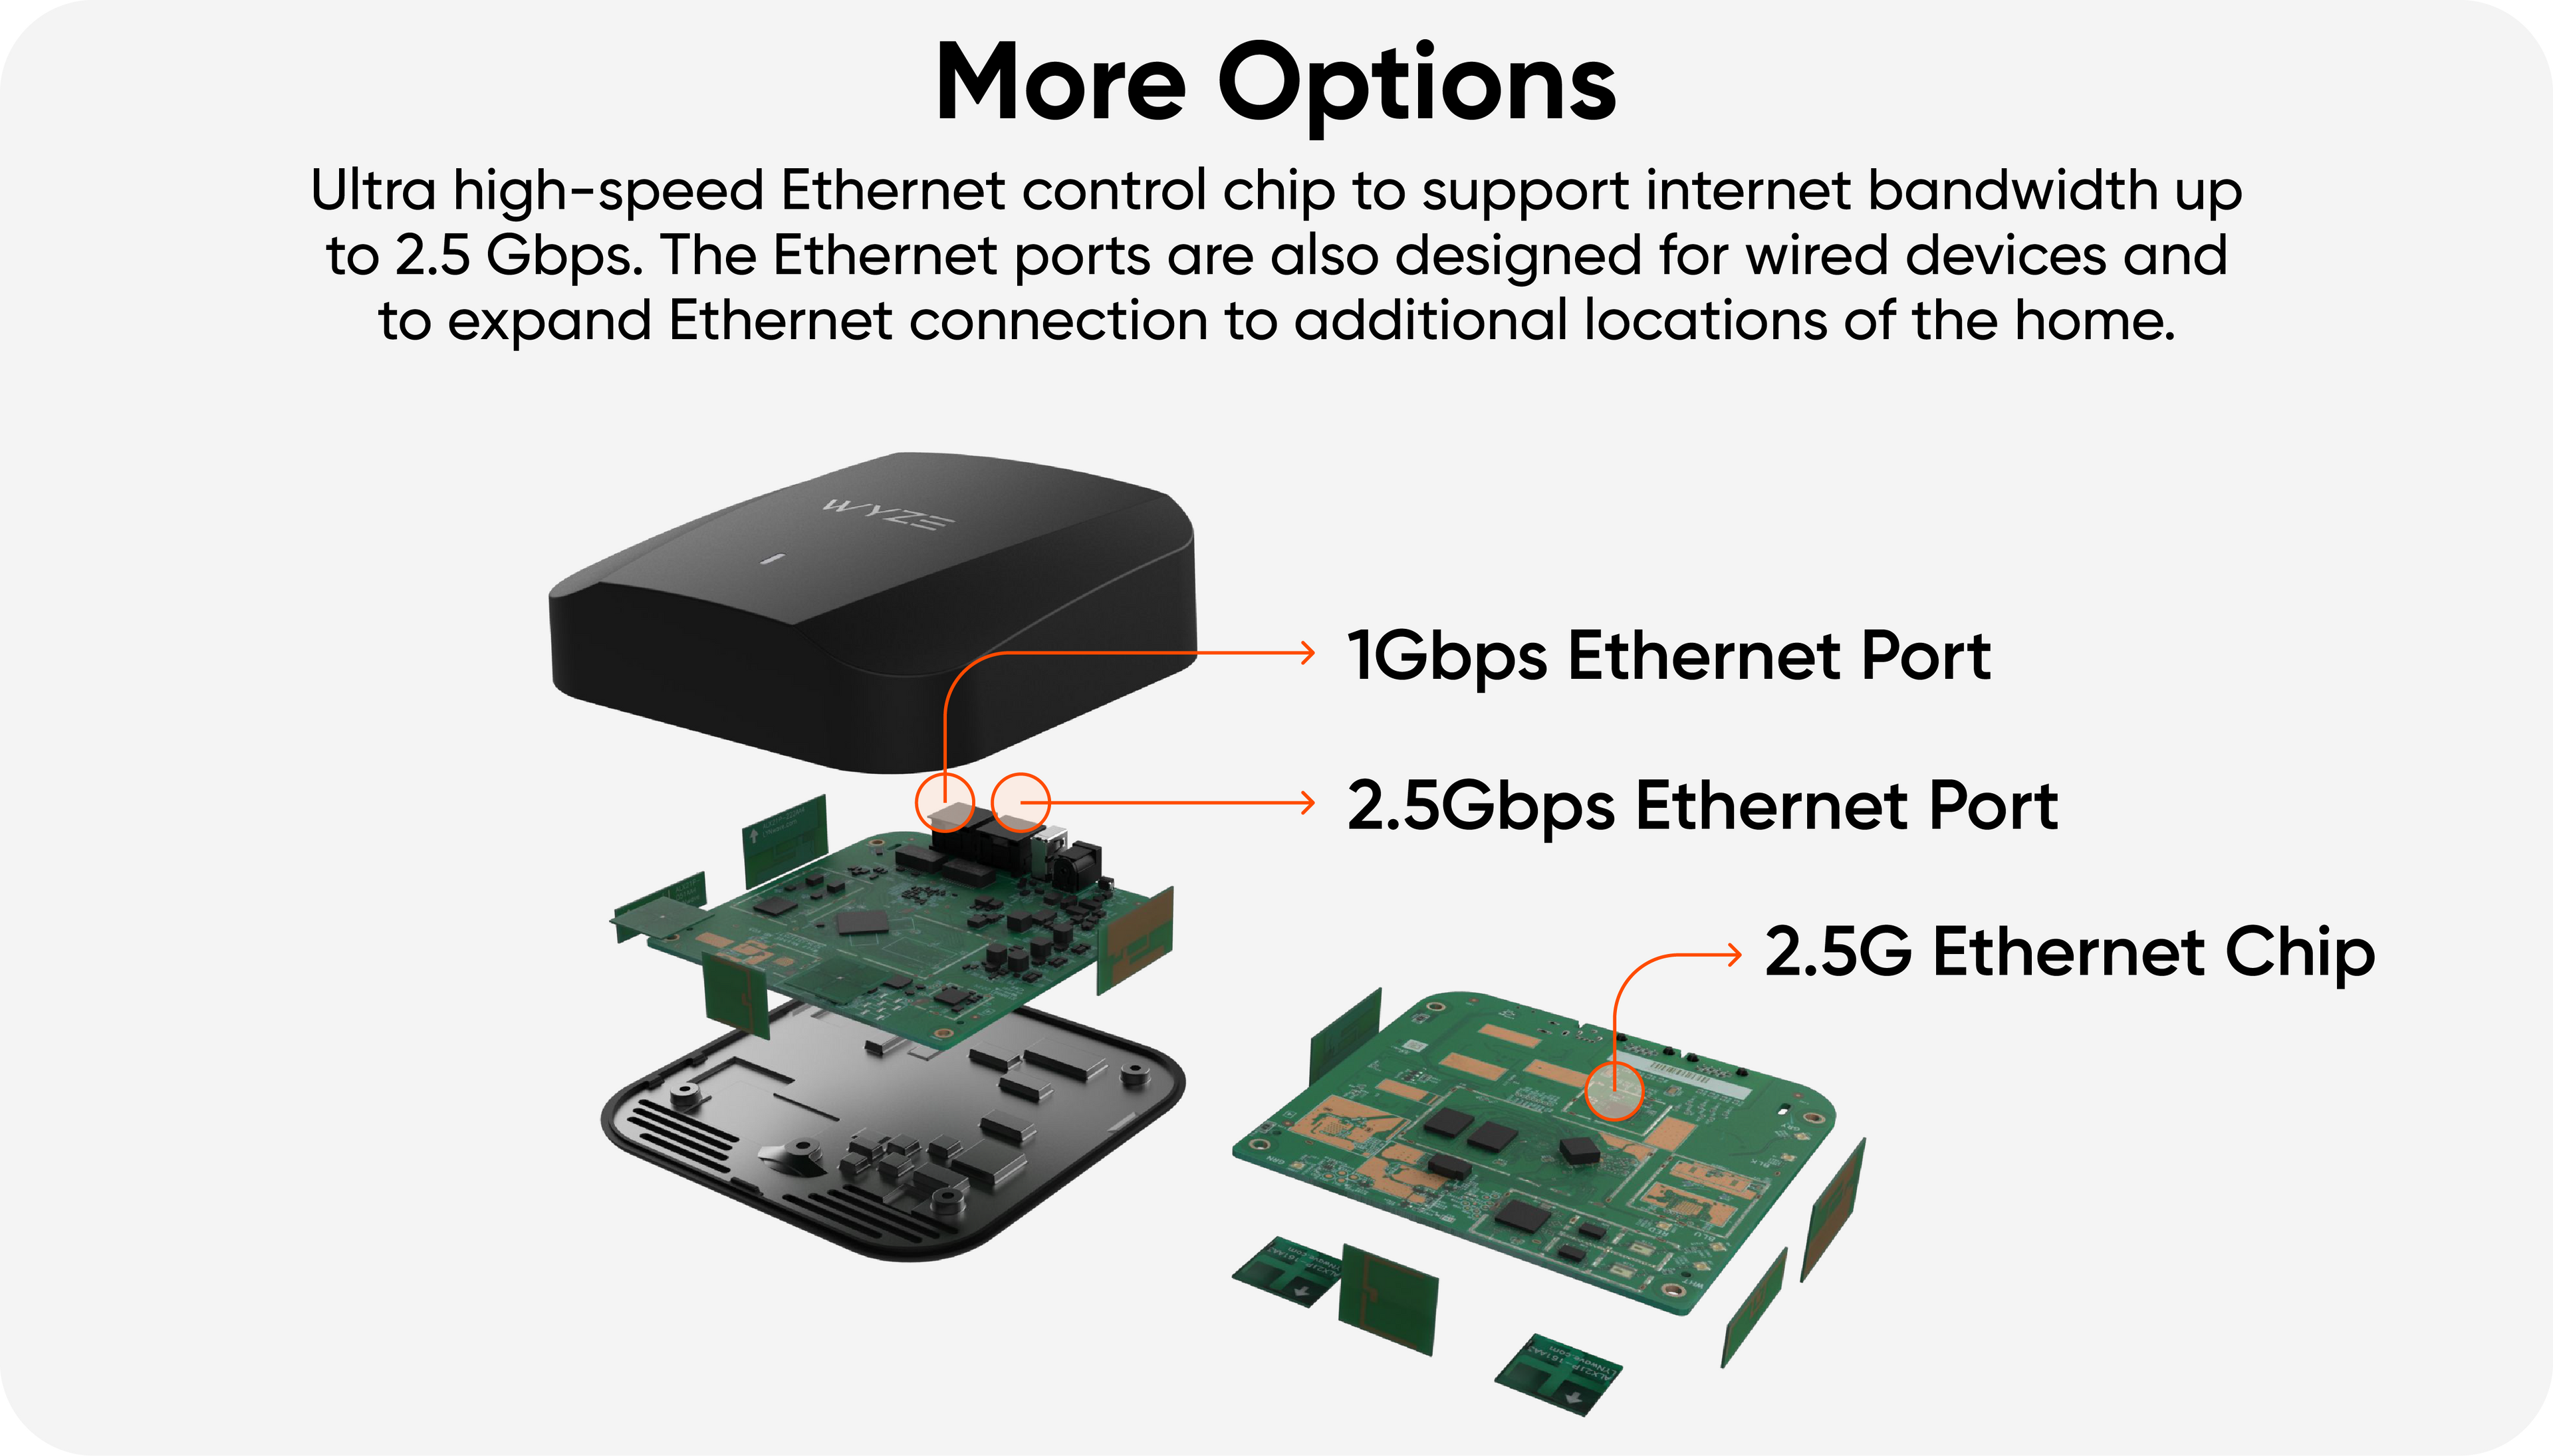 Mesh Router Pro exploded product view with ethernet ports labelled. Text overlay that says "More Options."